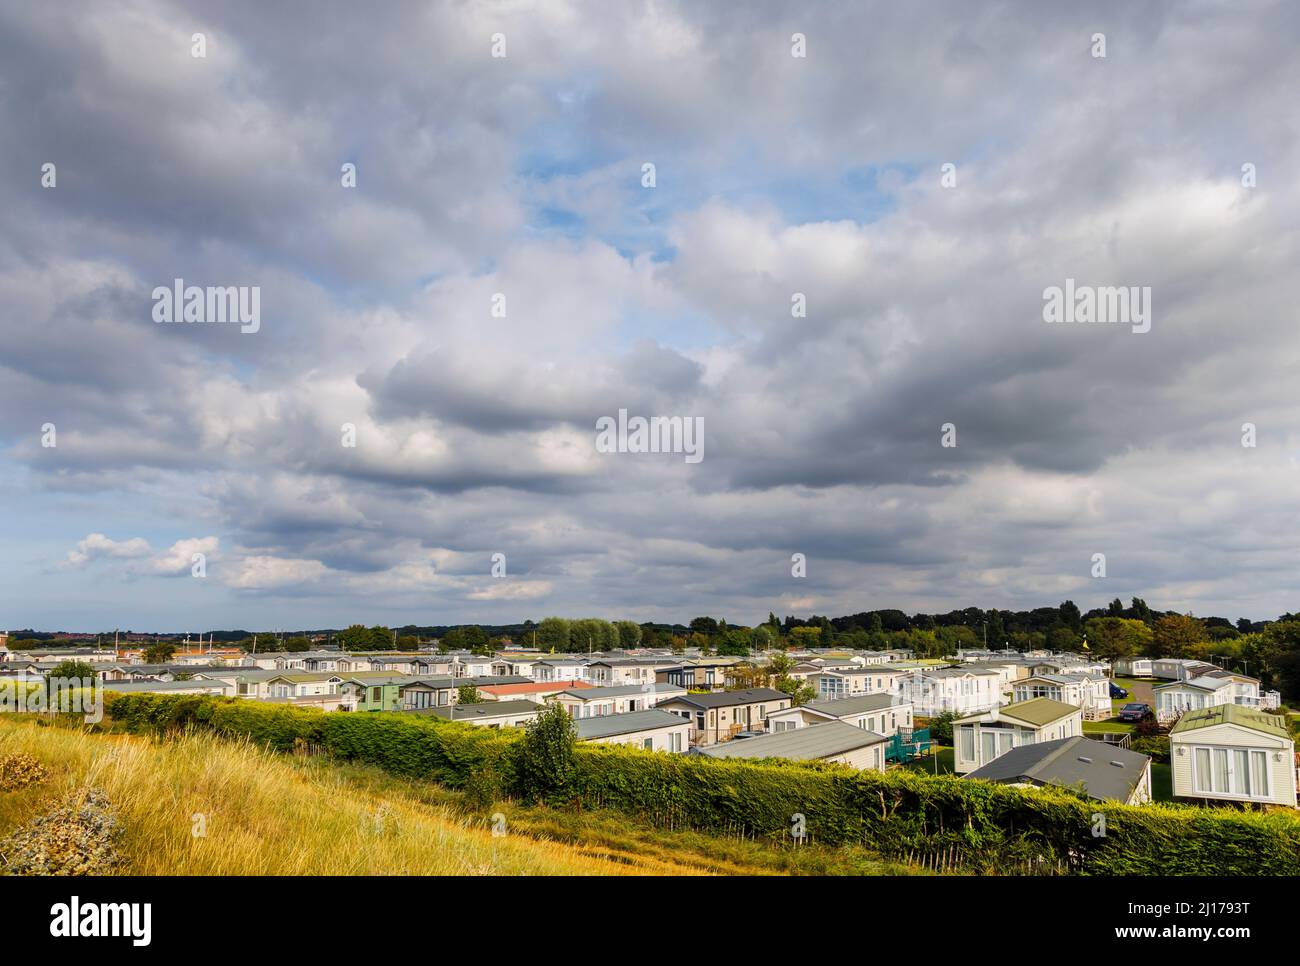 A large holiday mobile home caravan park in Heacham, a coastal village in west Norfolk, England, overlooking The Wash Stock Photo